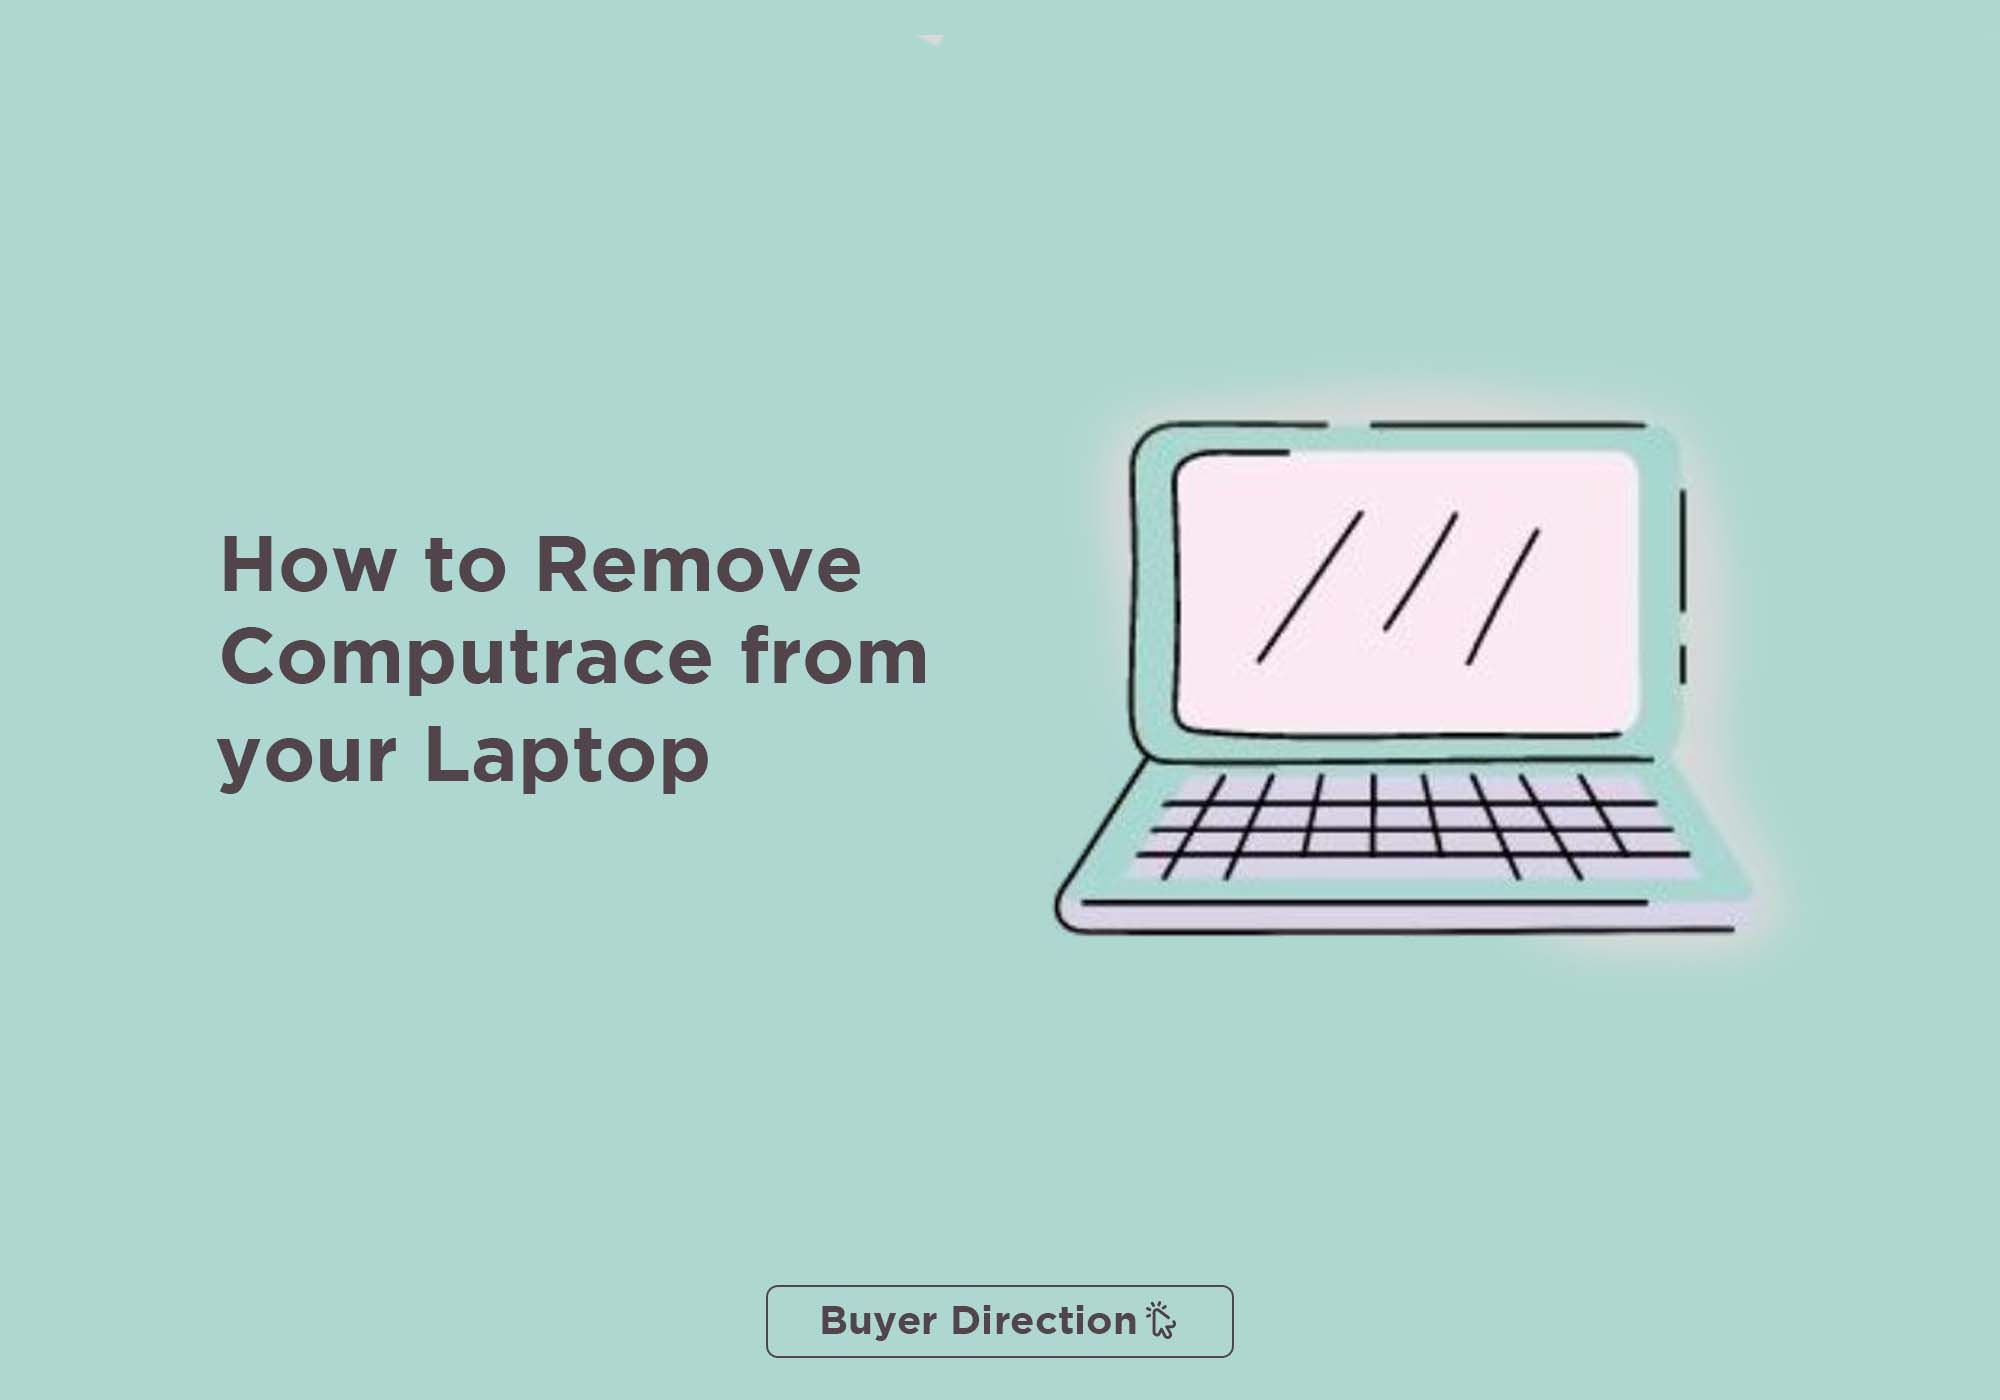 How to Remove Computrace from your Laptop